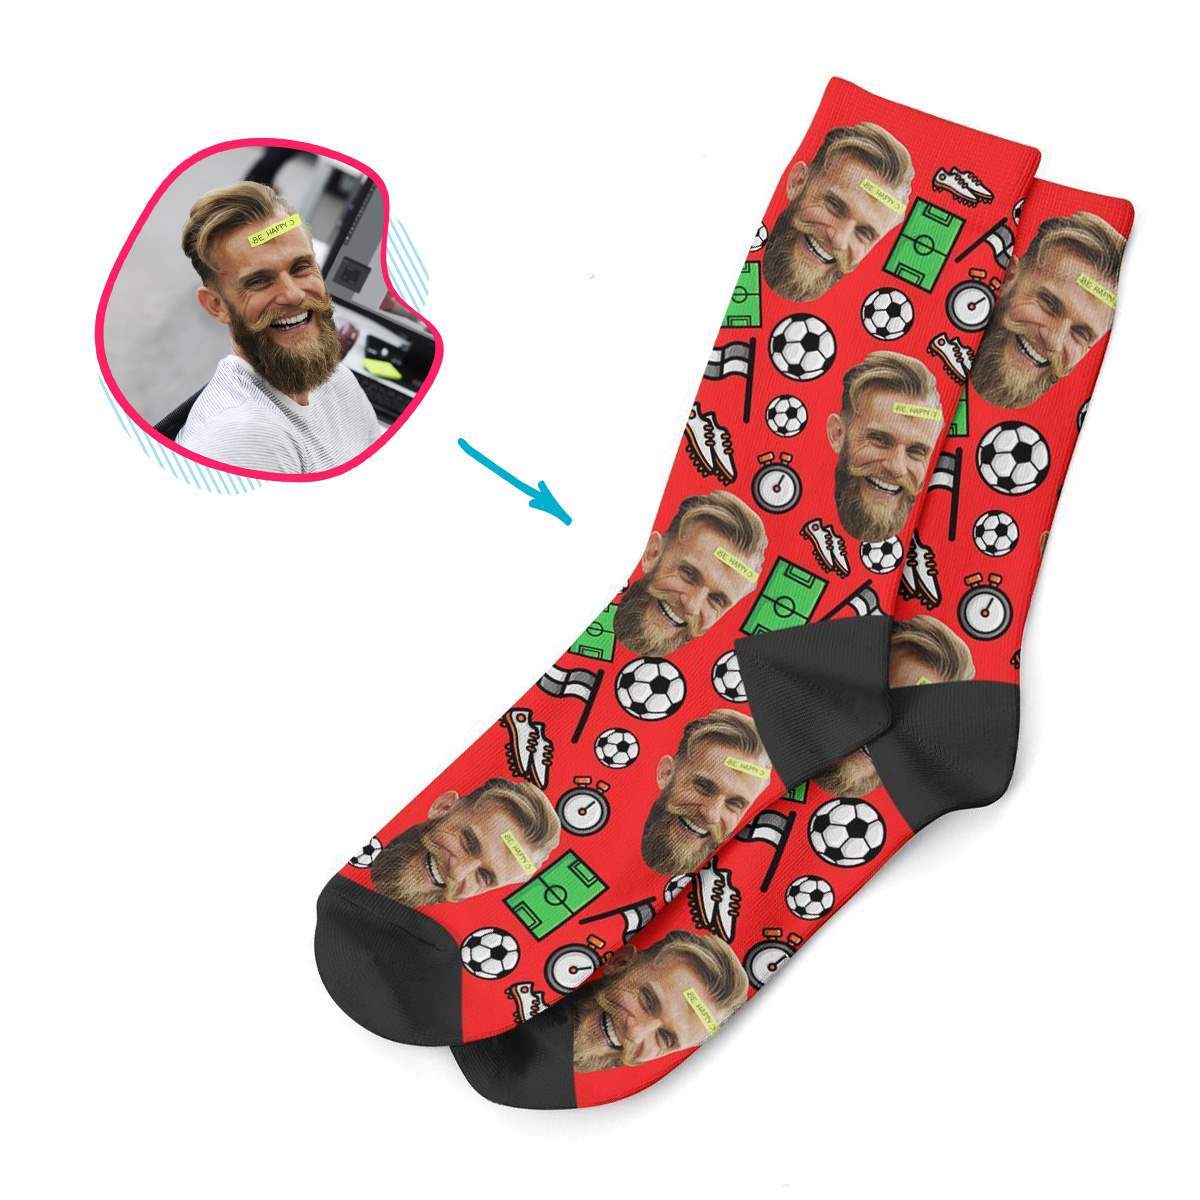 red Football socks personalized with photo of face printed on them